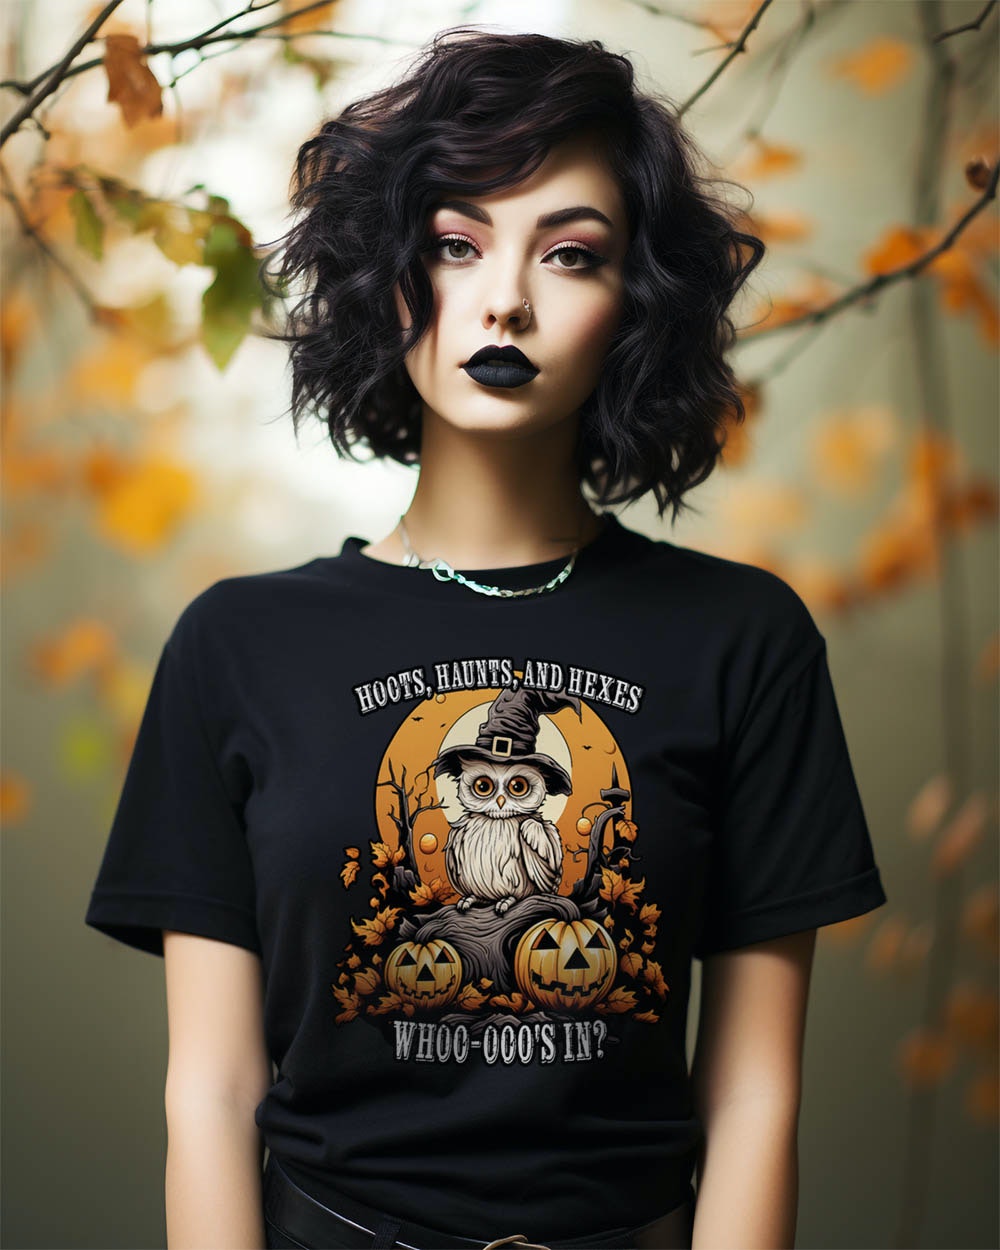 Hoots Haunts and Hexes Tee - Alt Goth T-Shirt Unisex Halloween Dark Academia Witchy Alt Style Occult Fashion